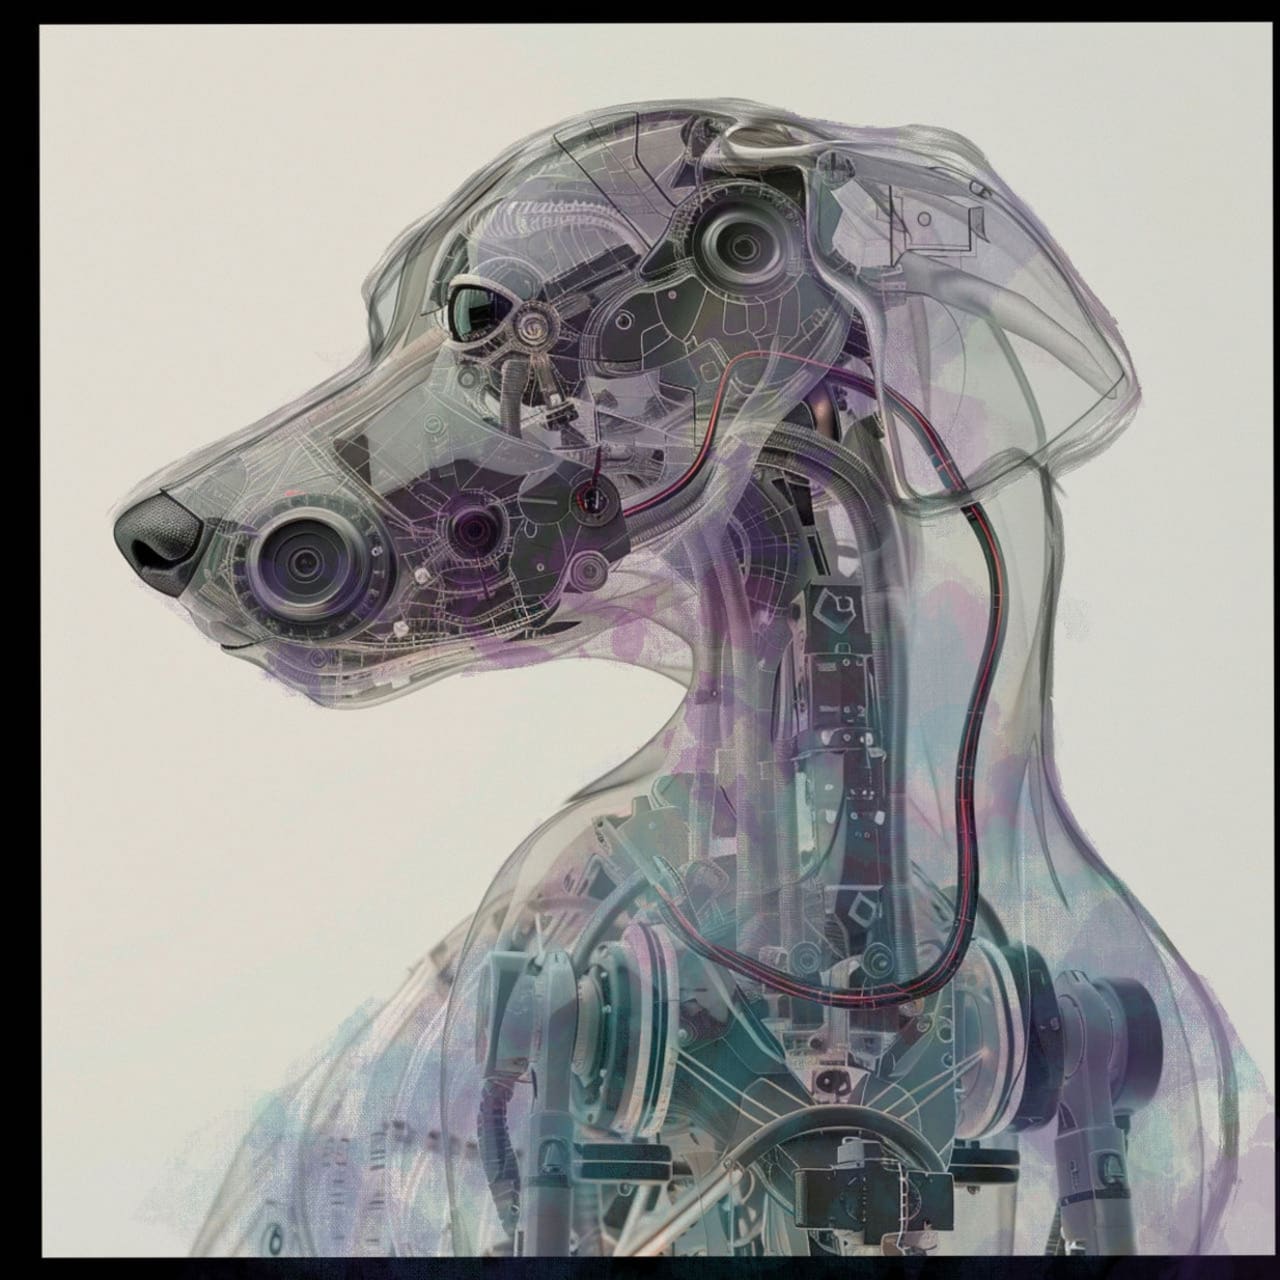 This is a future dog designed according to the customers need, using future techniques of bioengineering and artificial breeding